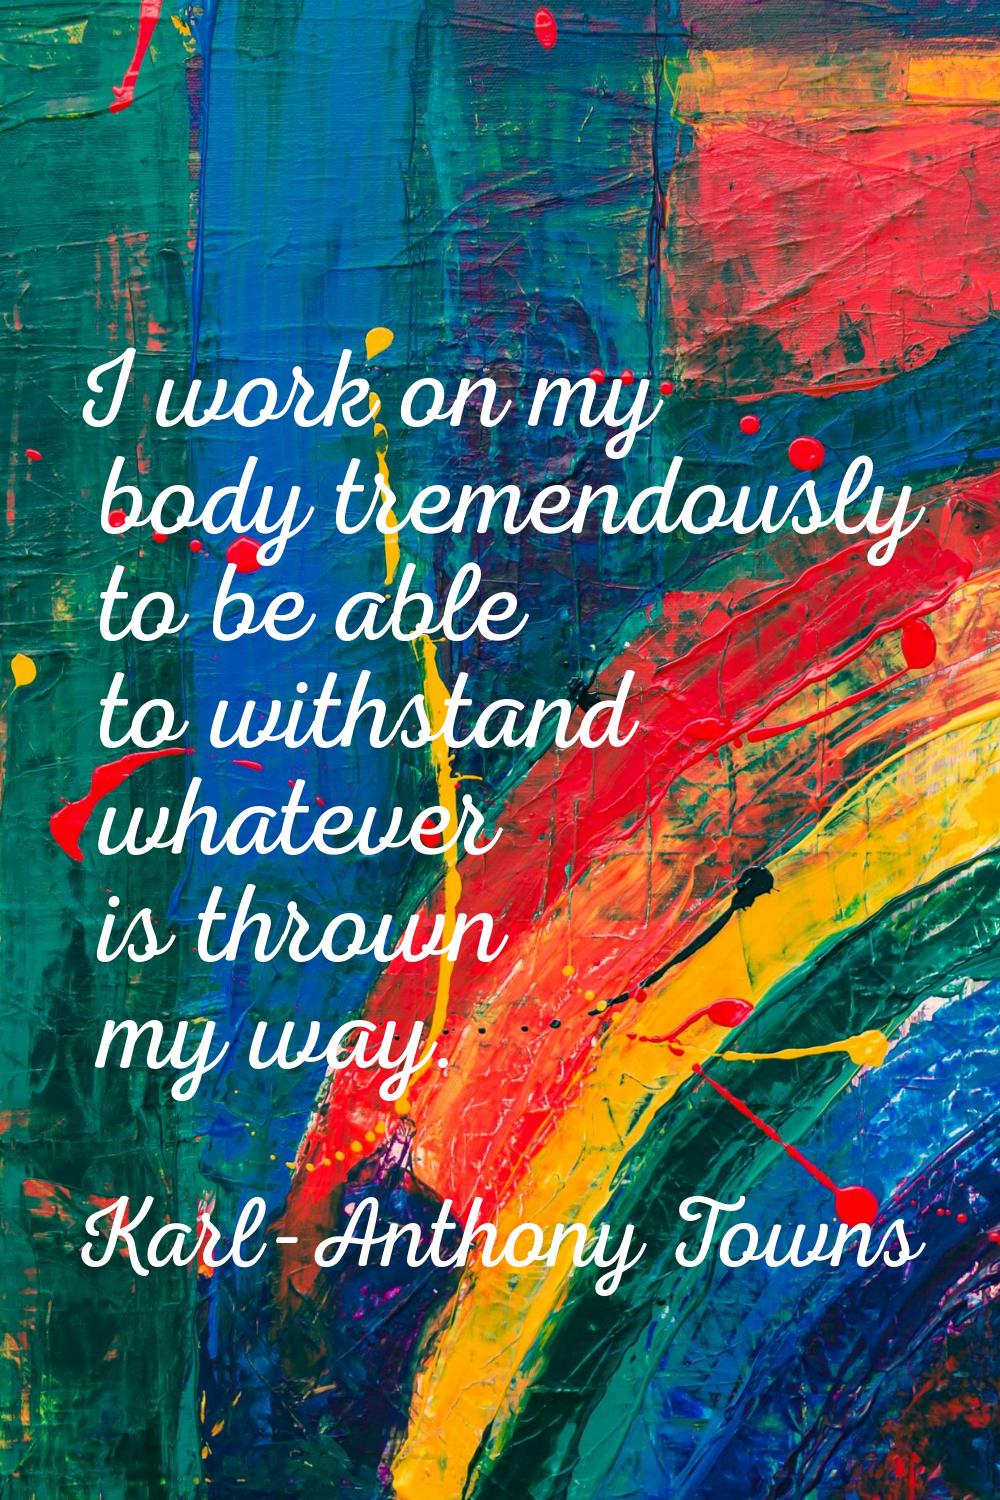 I work on my body tremendously to be able to withstand whatever is thrown my way.